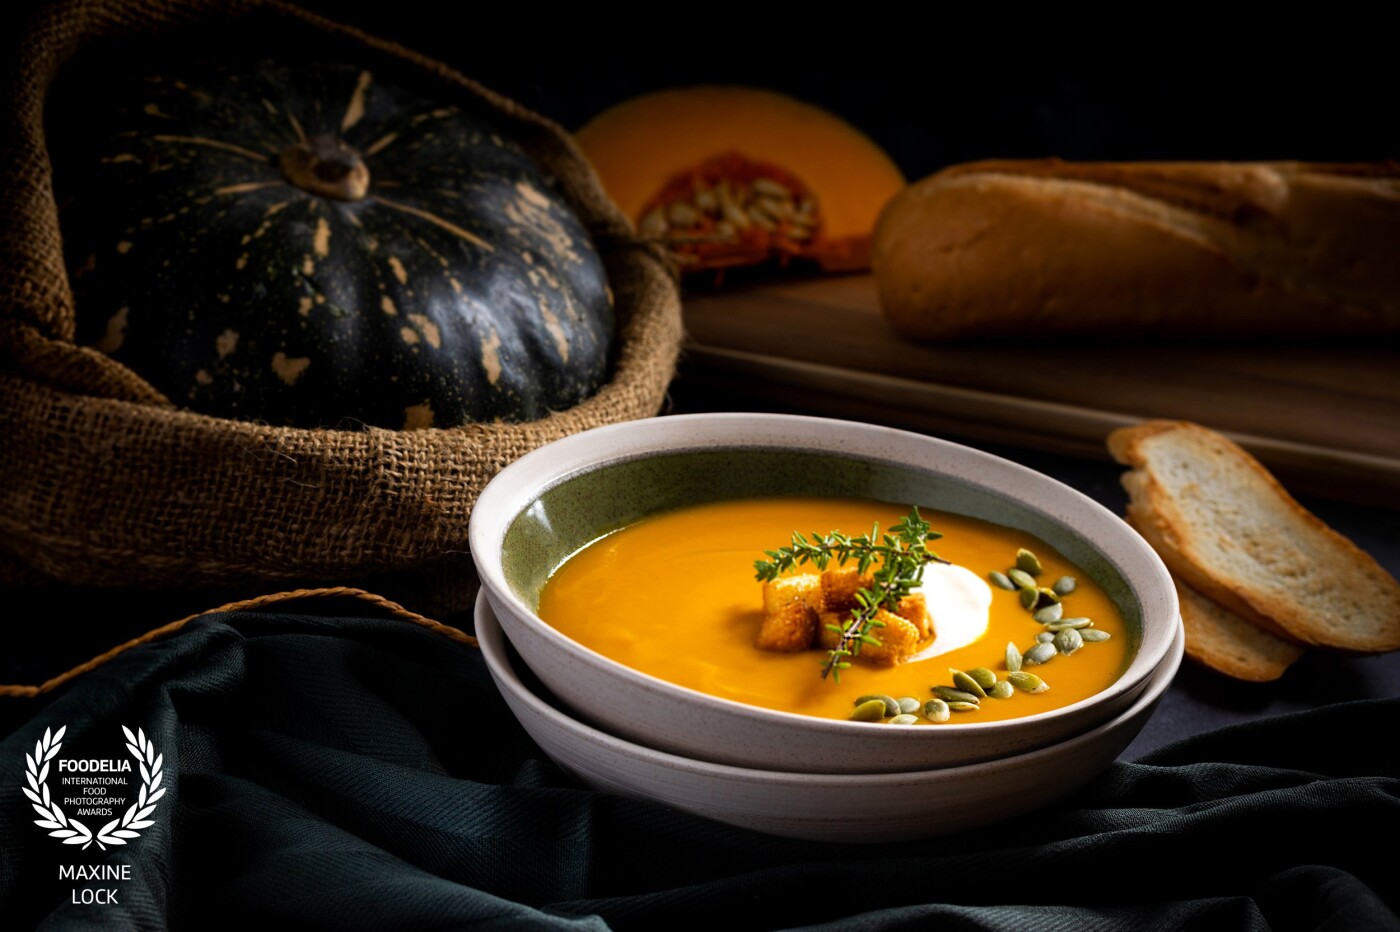 Pumpkin soup in a bowl, where I tried to create a warm and cosy feel to the image, however with focus still being drawn to the soup itself.